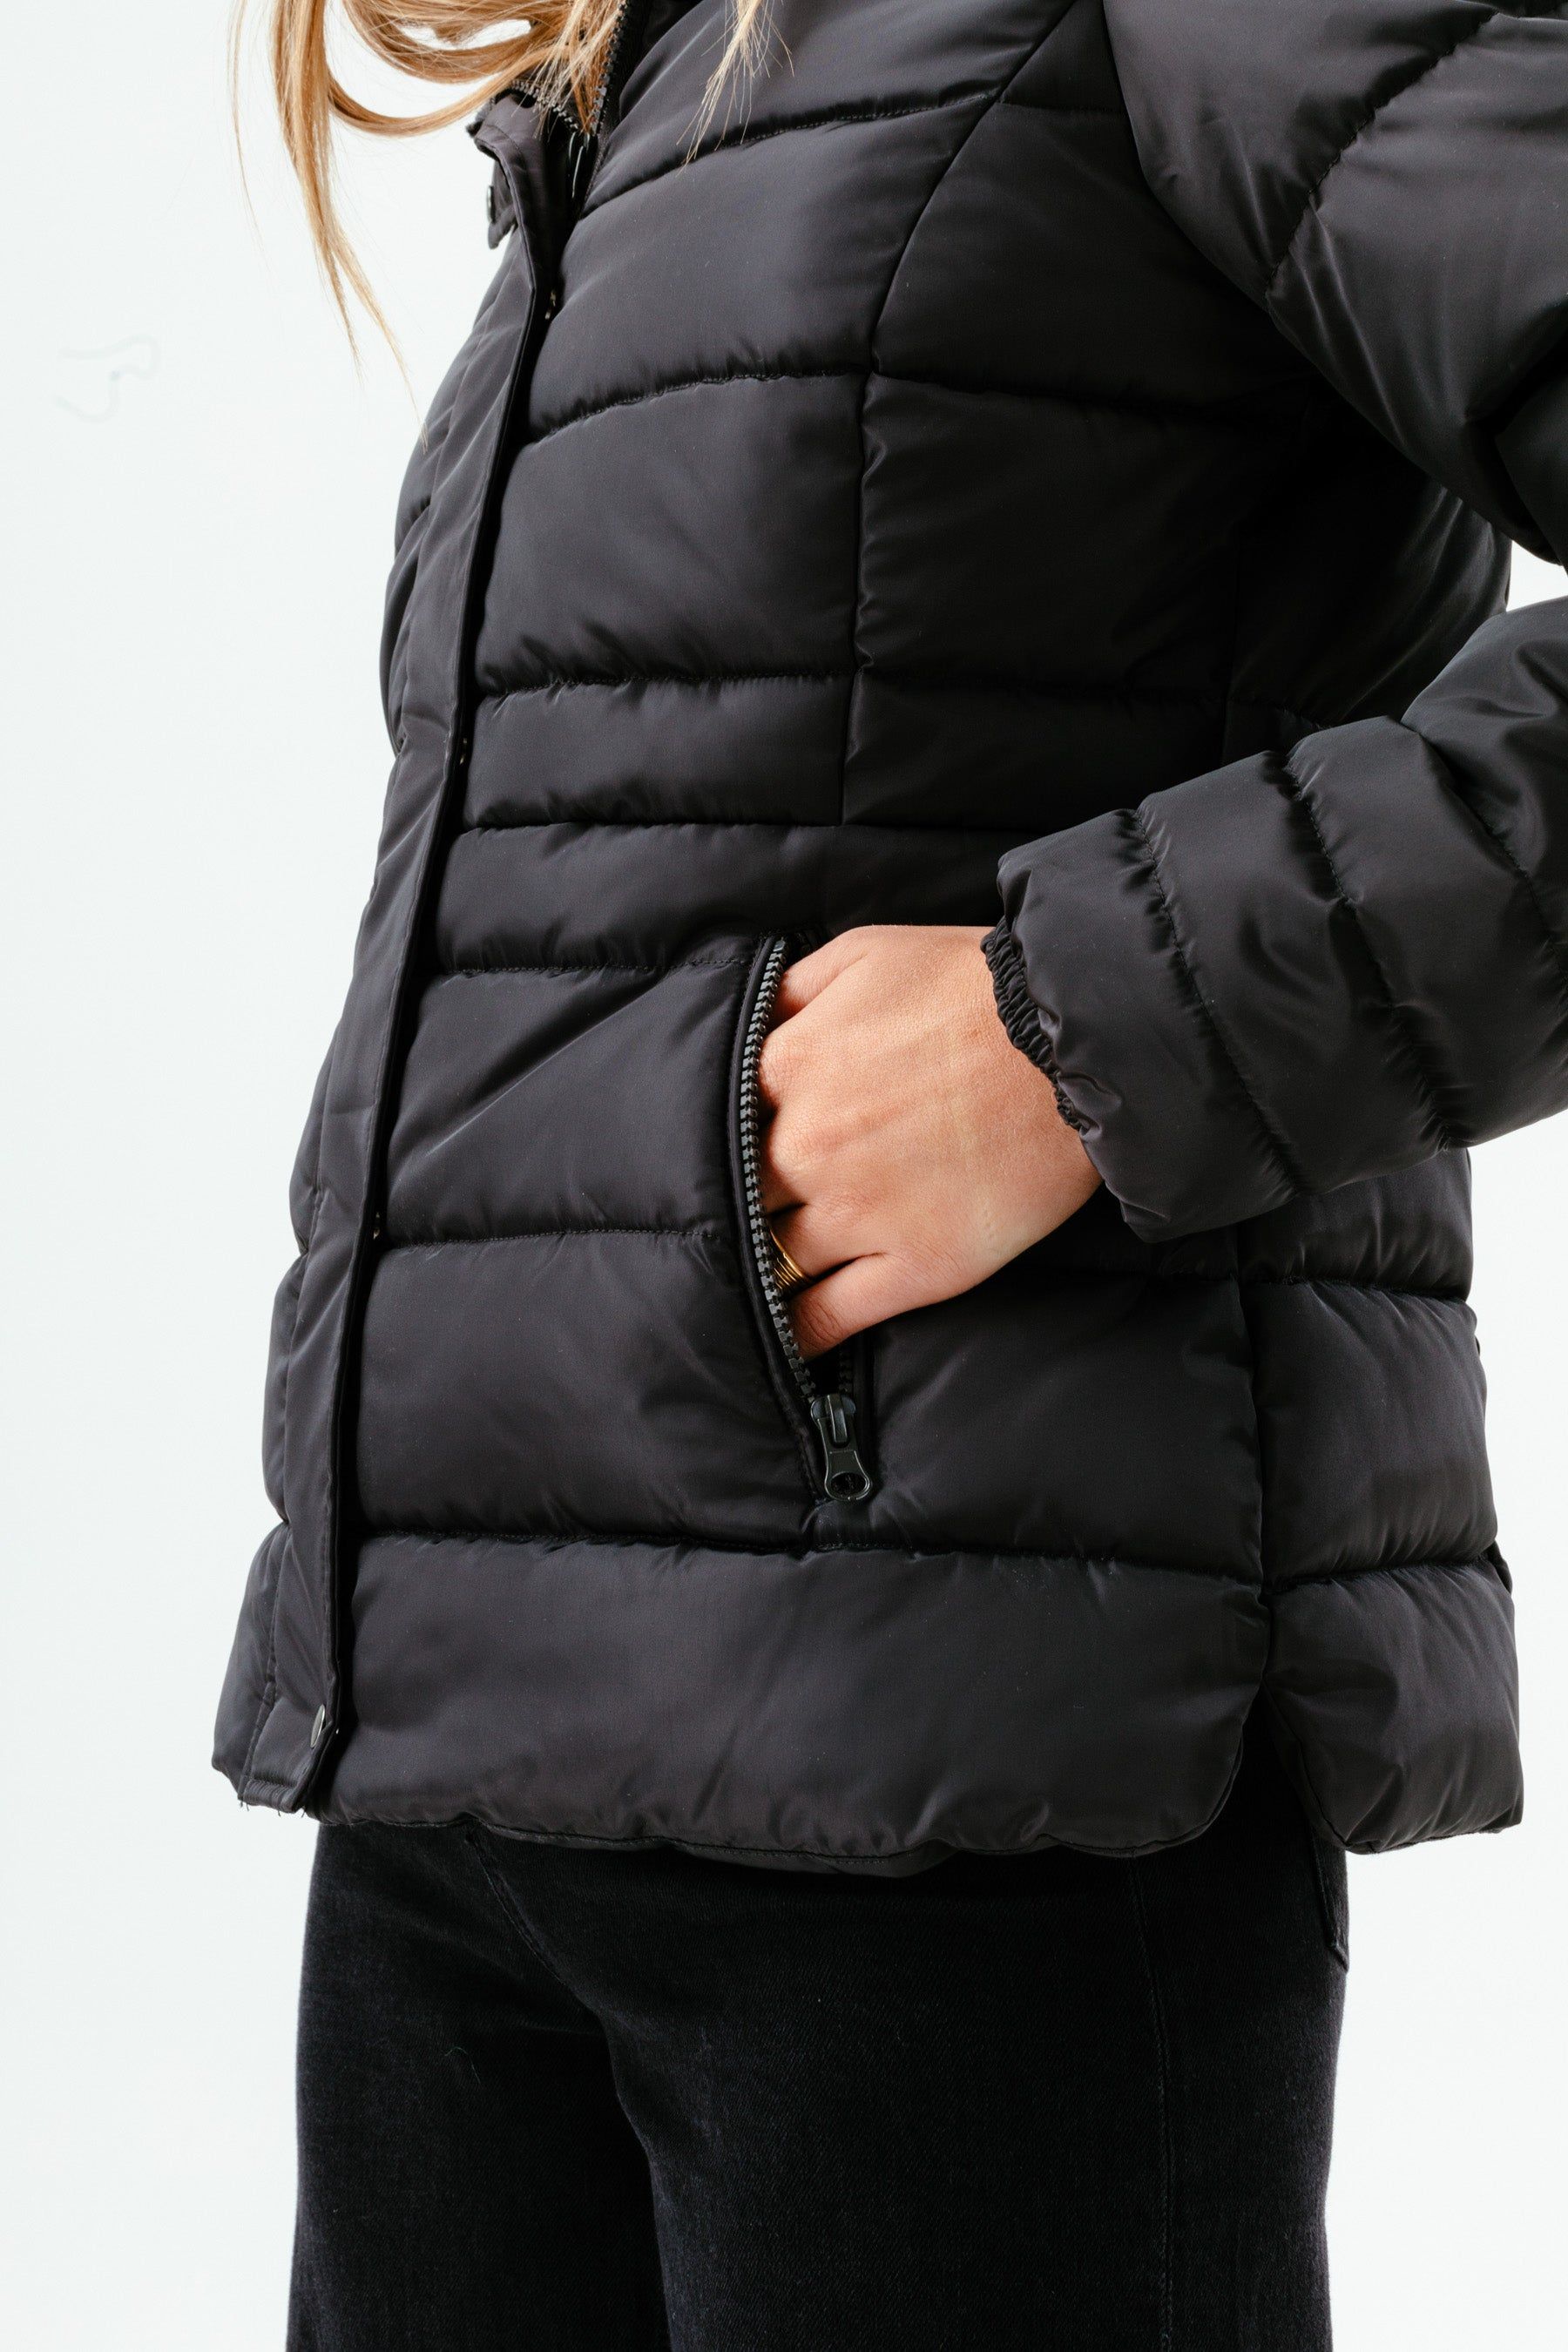 Introducing the HYPE. Women?s Charcoal Scribble Label Fitted Puffer Jacket, perfect for braving the winter weather. Designed in our women?s fitted puffer shape in a charcoal colour palette, boasting a faux fur hood and woven hem labels. Wear with a HYPE. hoodie and matching joggers for the ultimate comfortable fit.